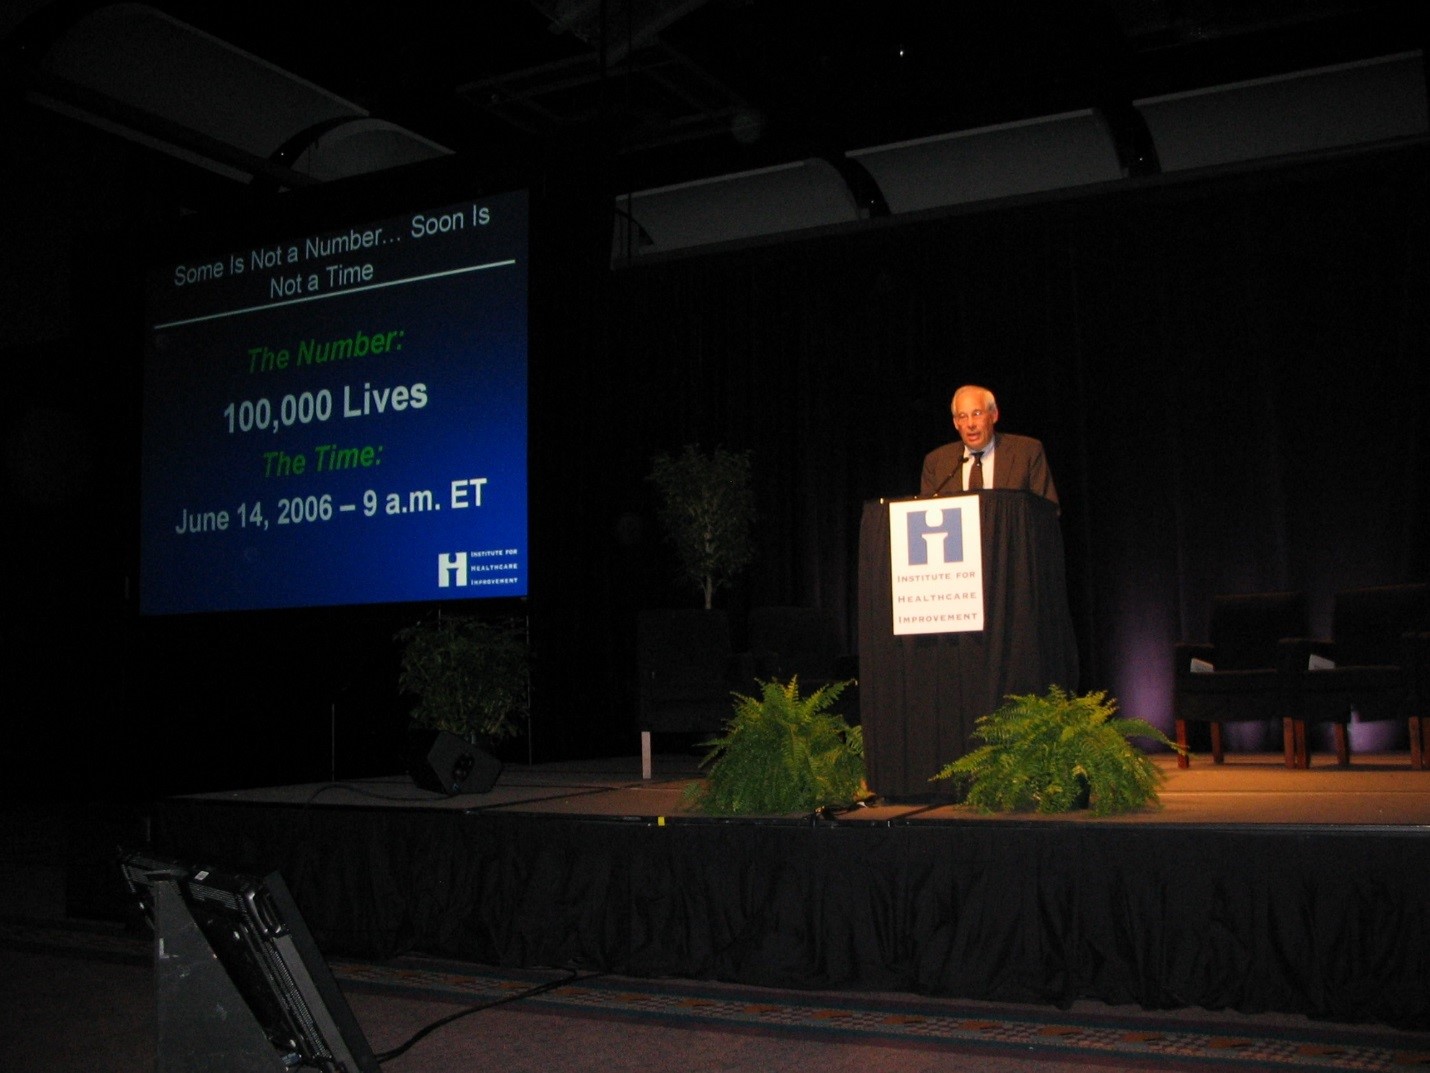 Berwick Announces Launch of 100,000 Lives Campaign at IHI Forum